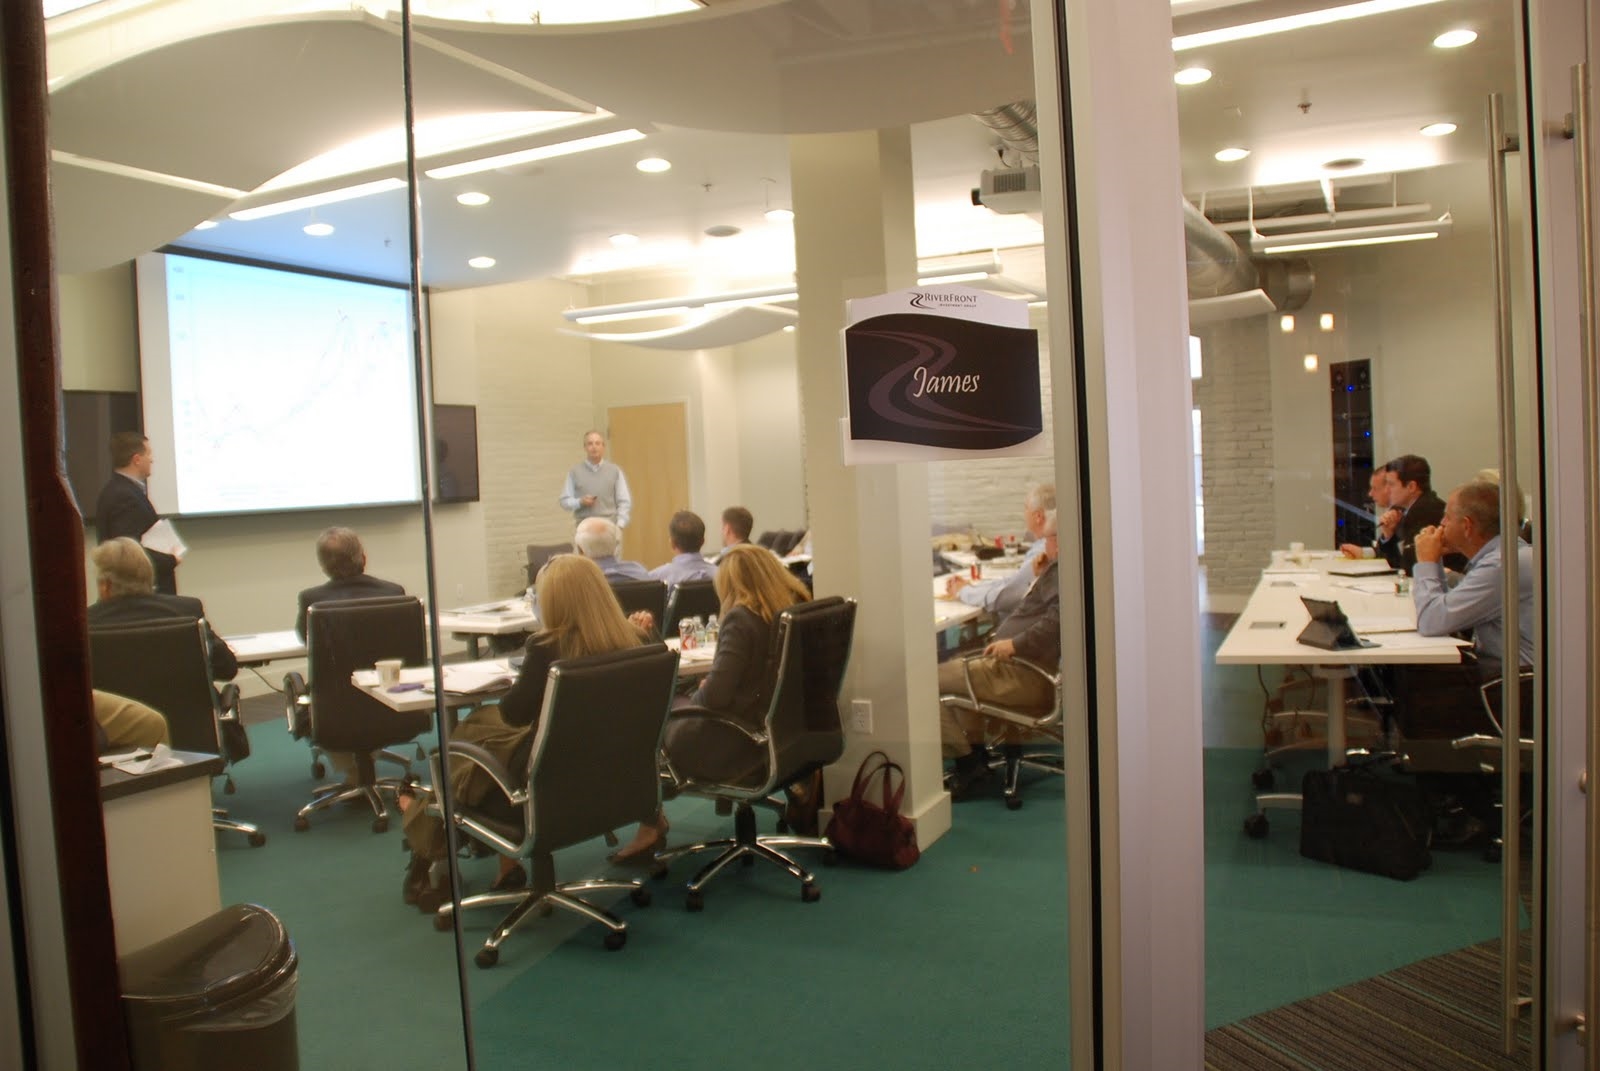 The James Room (named for the James River) offers a high-tech environment for communicating with clients.